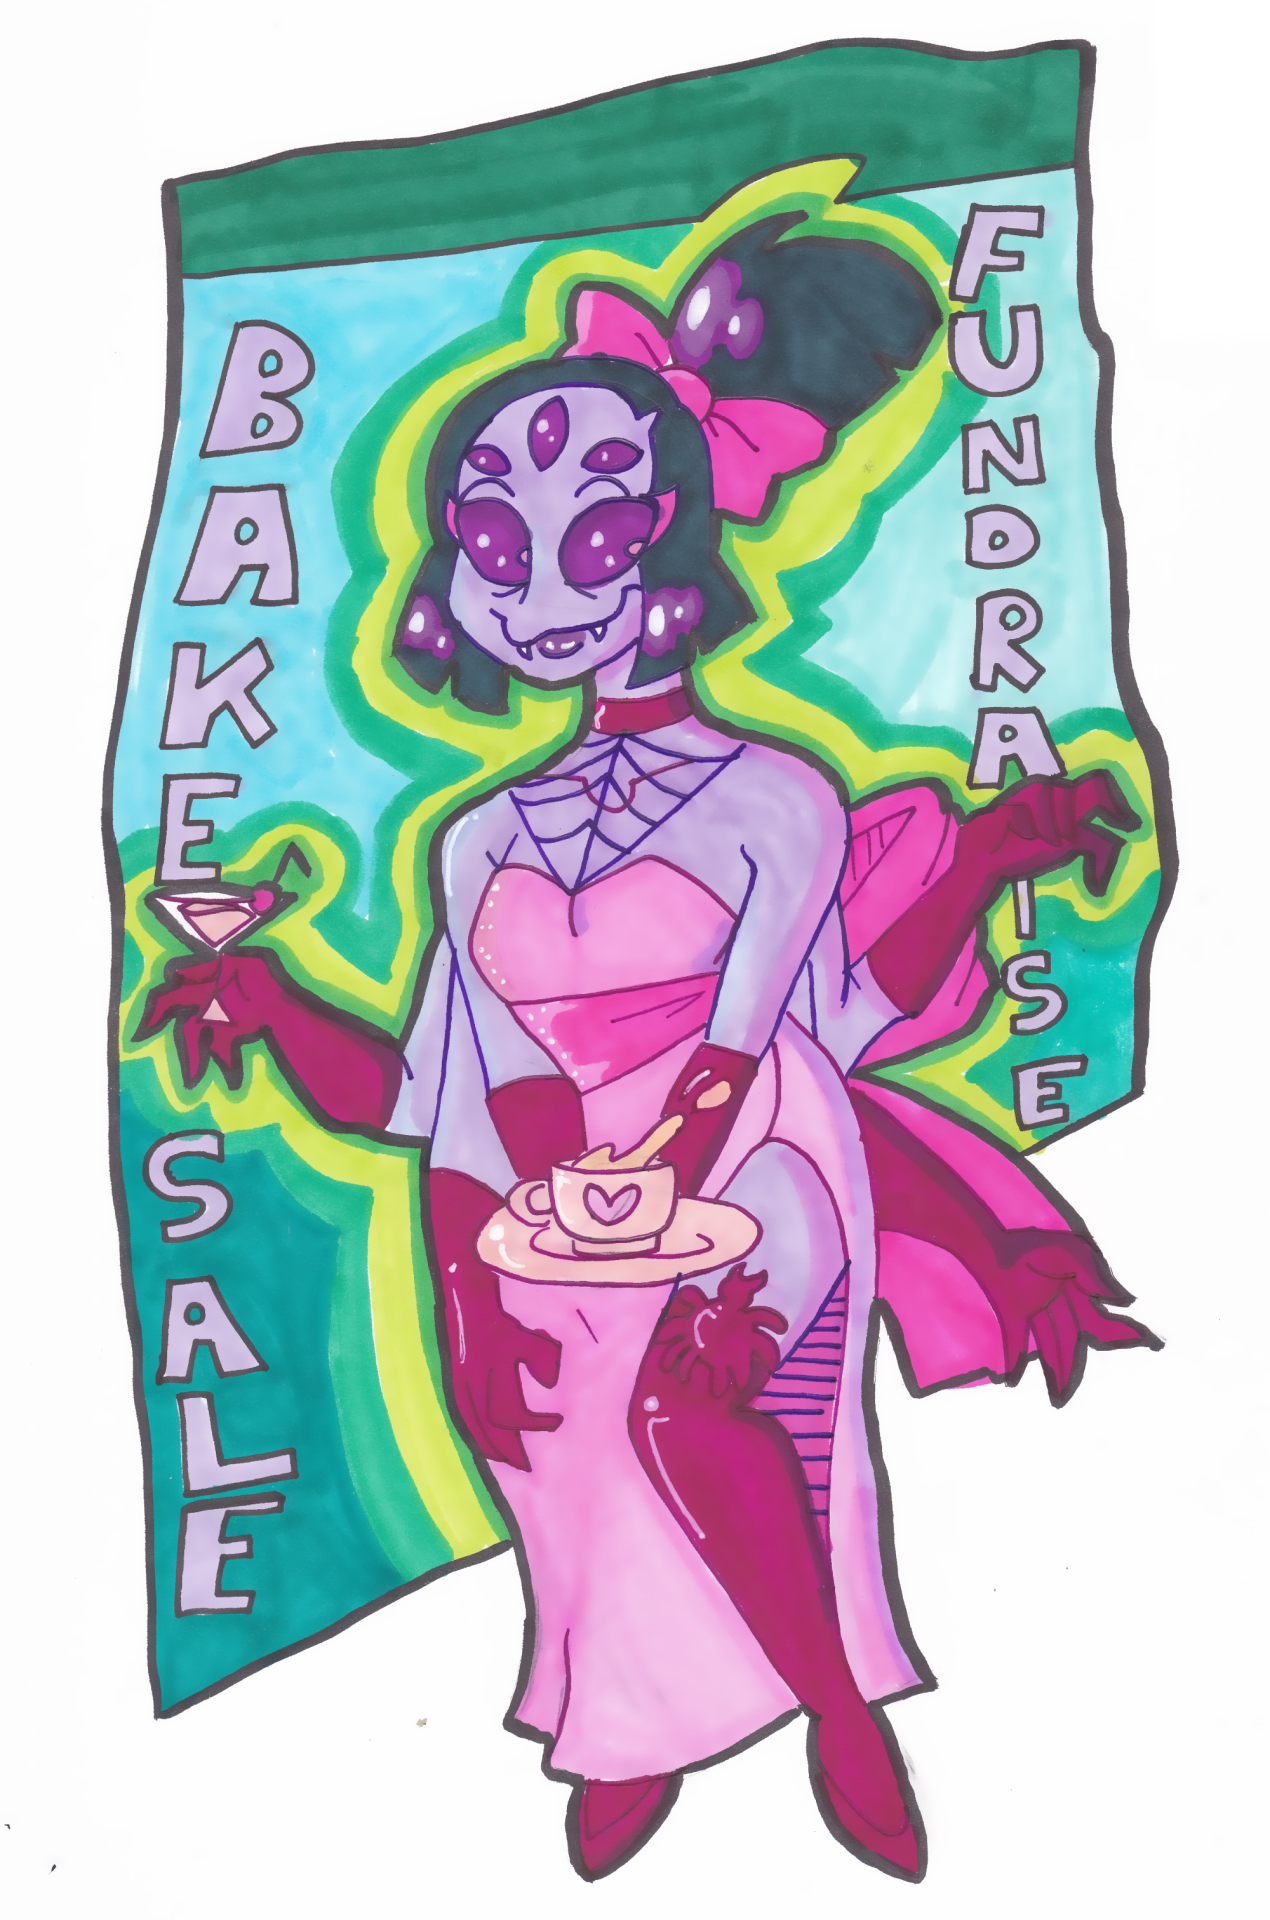 Muffet, done up all fancy for a big bake sale fundraiser! I mean, people don’t dress this fancy for em normally but maybe 